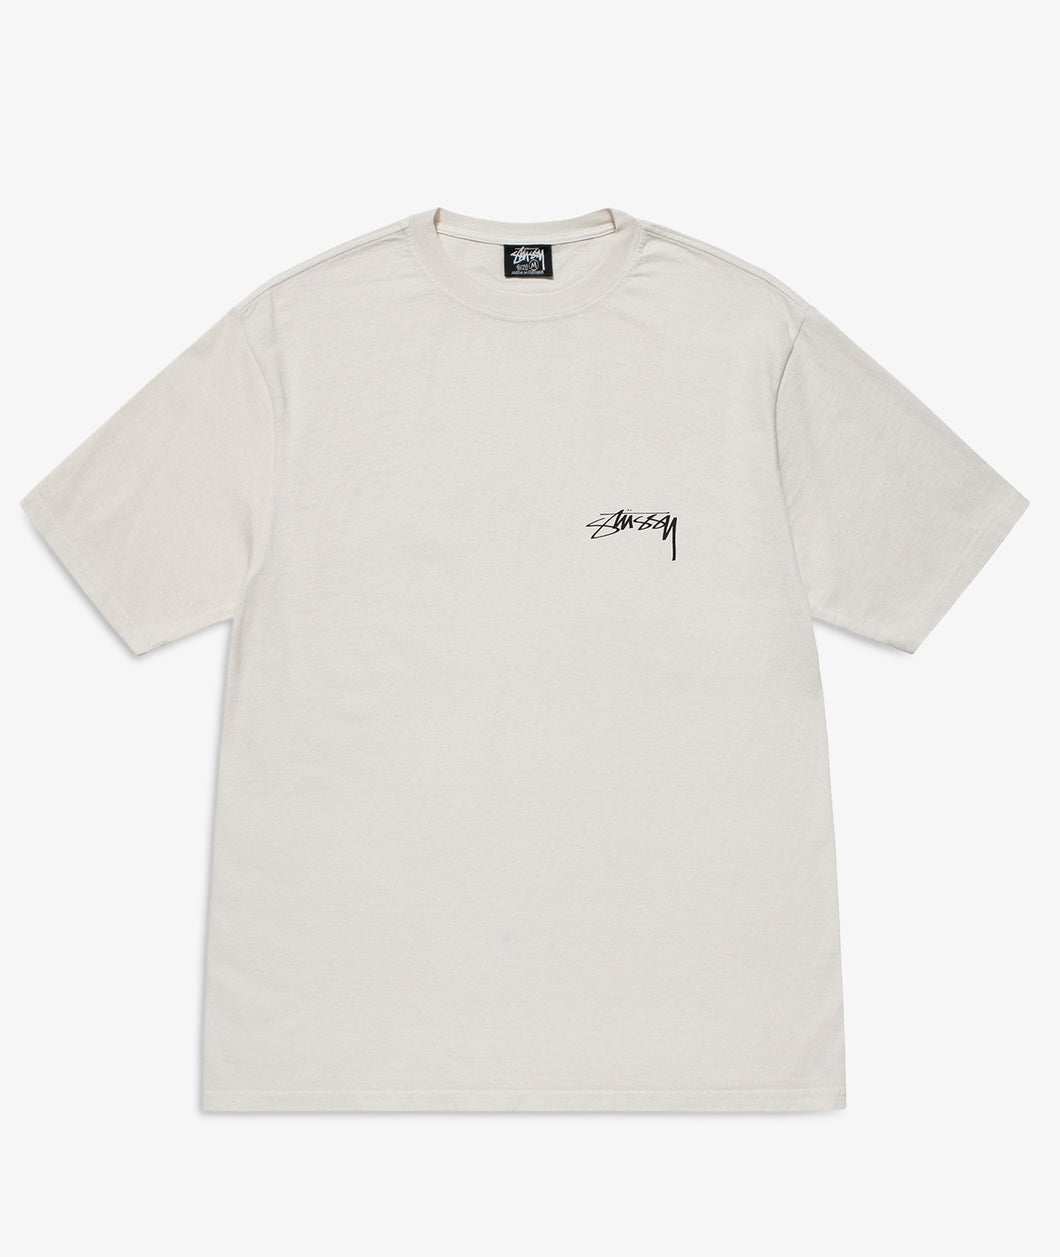 Stüssy Pigment Tee Dyed Natural